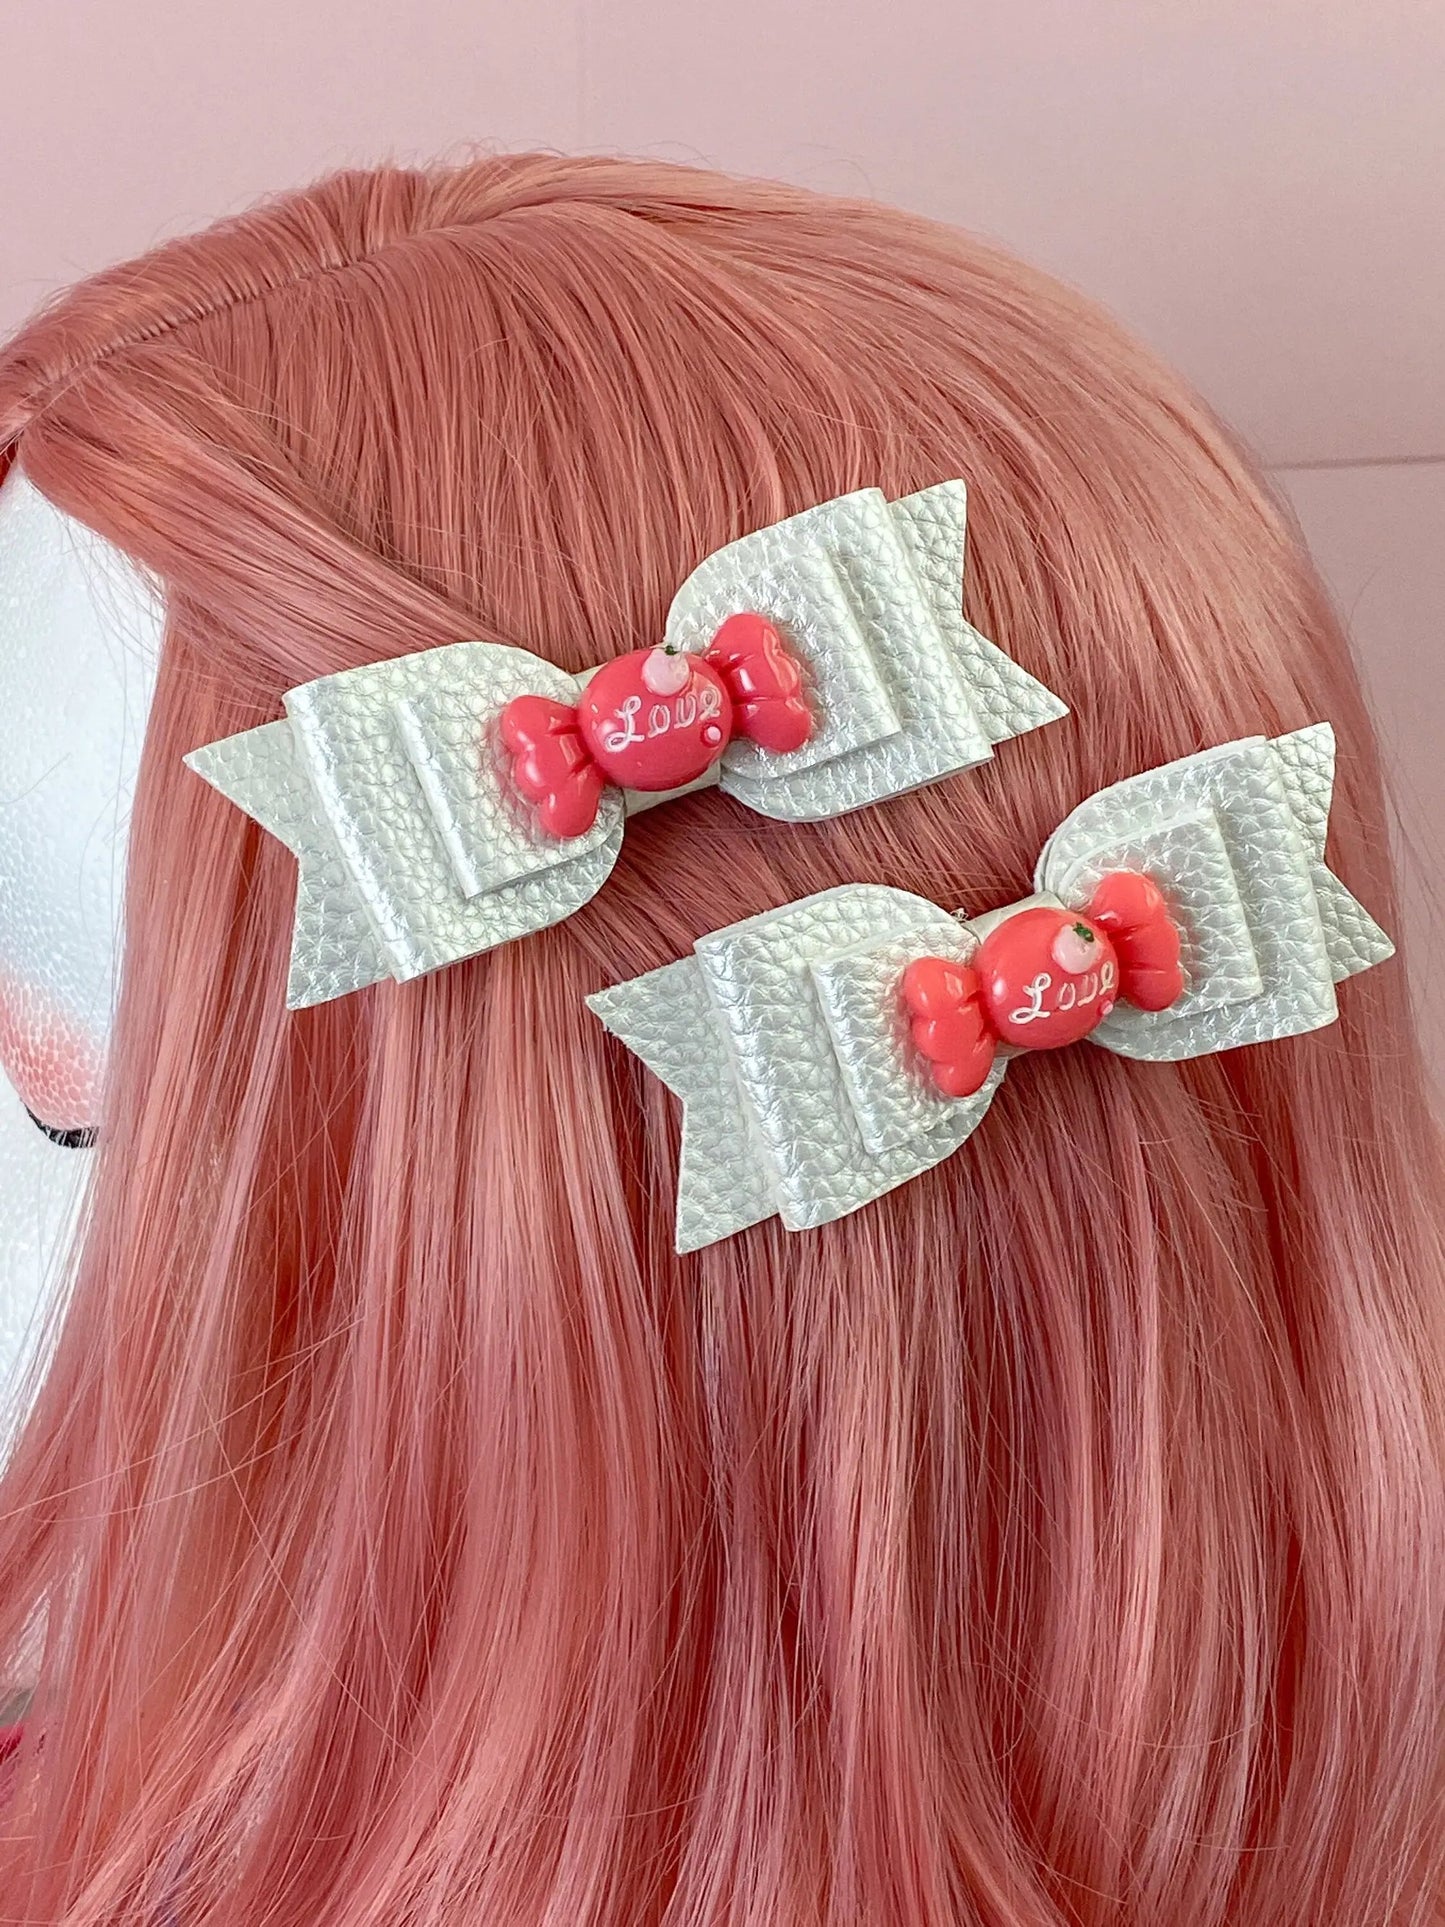 a close up of a person with pink hair and two bows